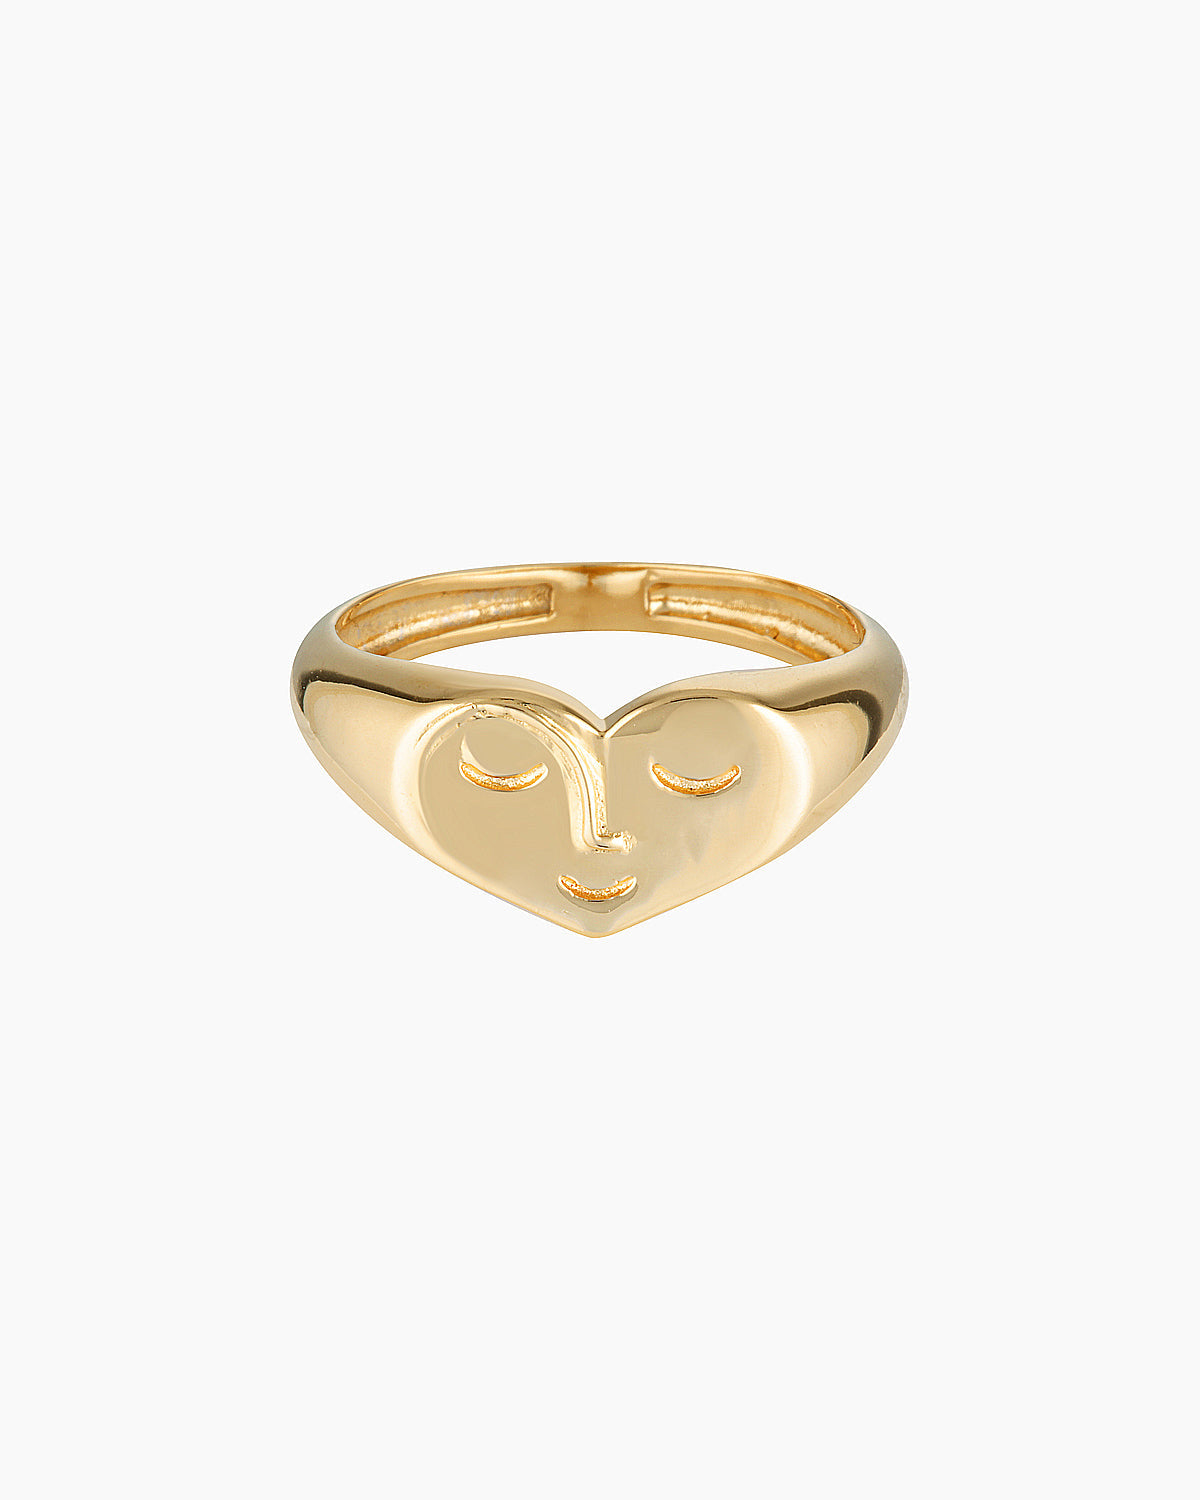 IMPERFECT HEART RING